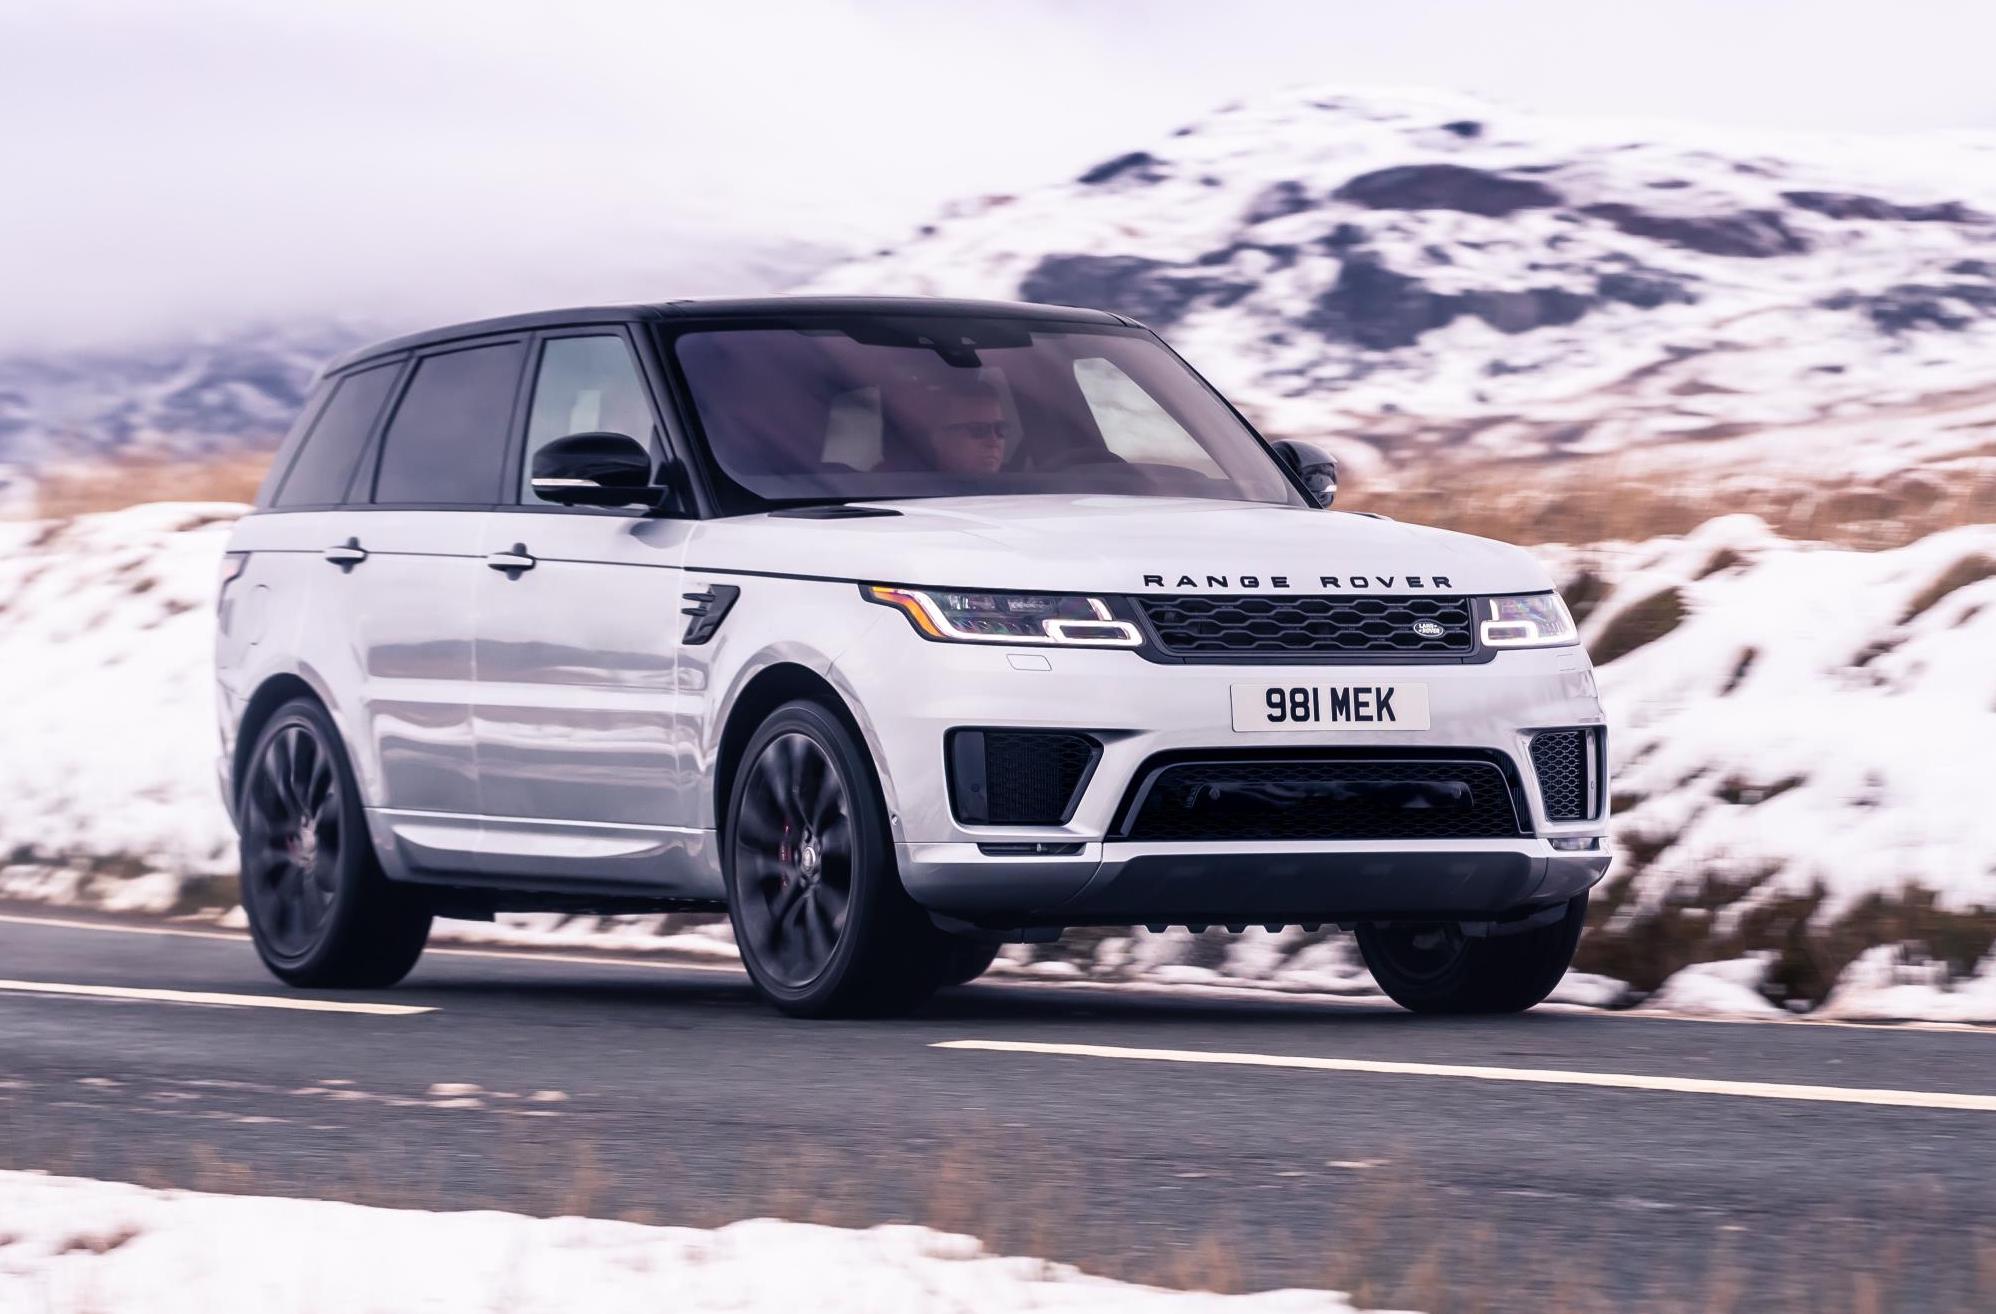 Range Rover Sport HST special edition gets new inline-6